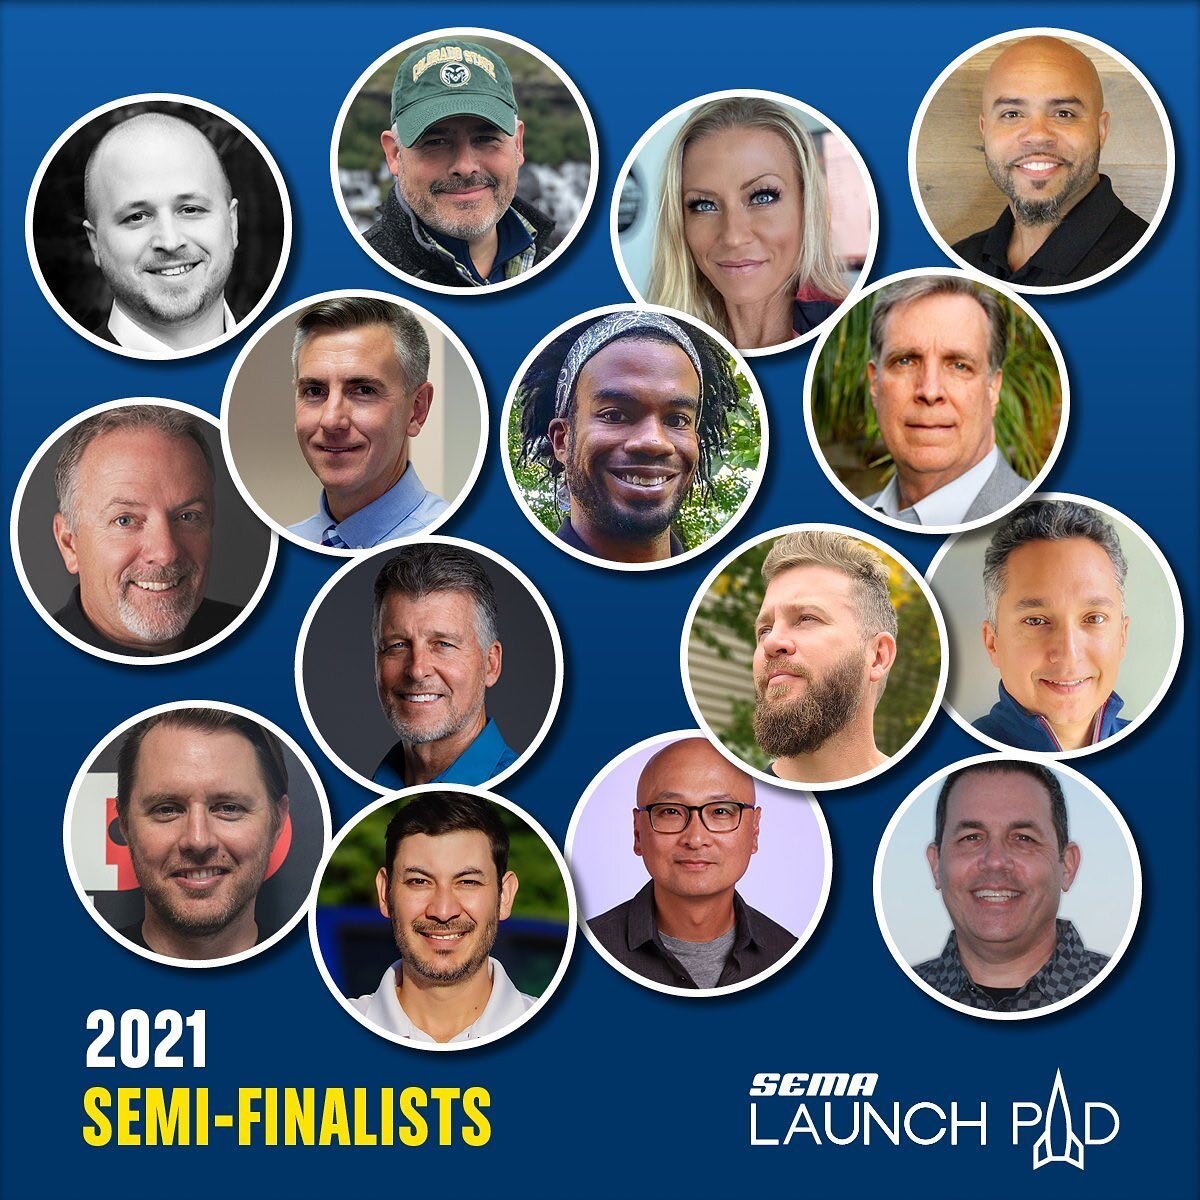 We are beyond excited to take part in this years SEMA Launch Pad competition and be one of the top 15 semi finalists! Thank you to everyone who has supported us so far in our endeavor to #saveyourkidneys #sema #launchpad